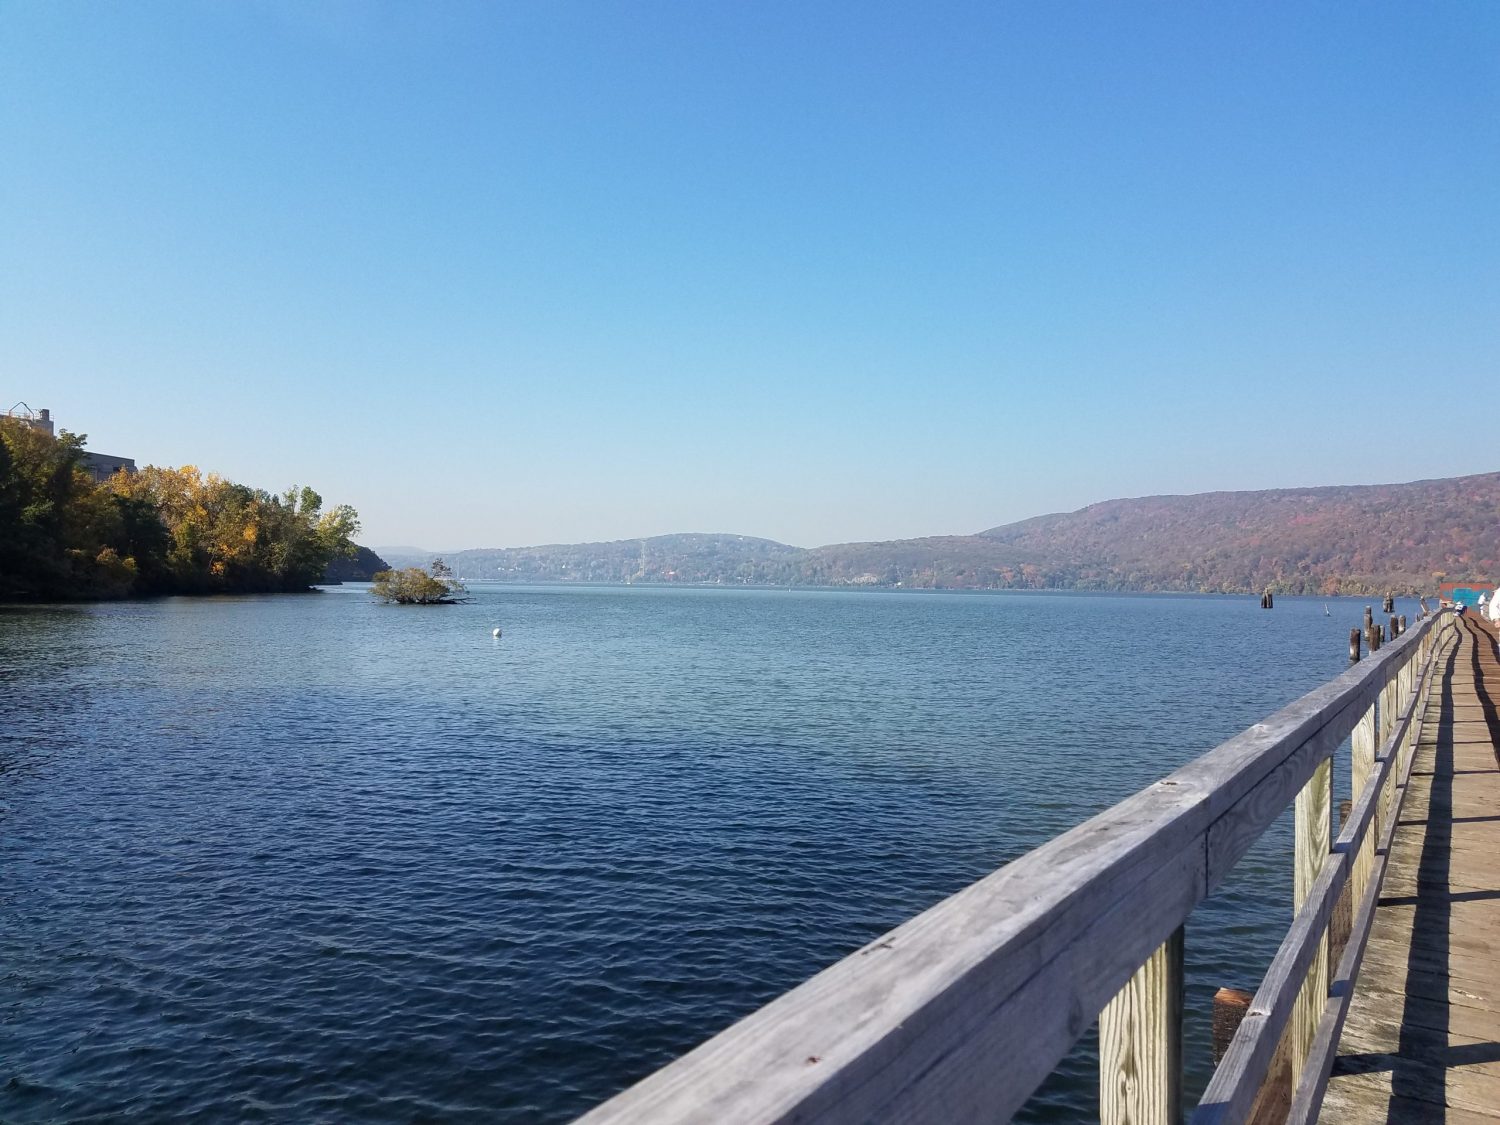 View of hudson river from pier in Peekskill ny